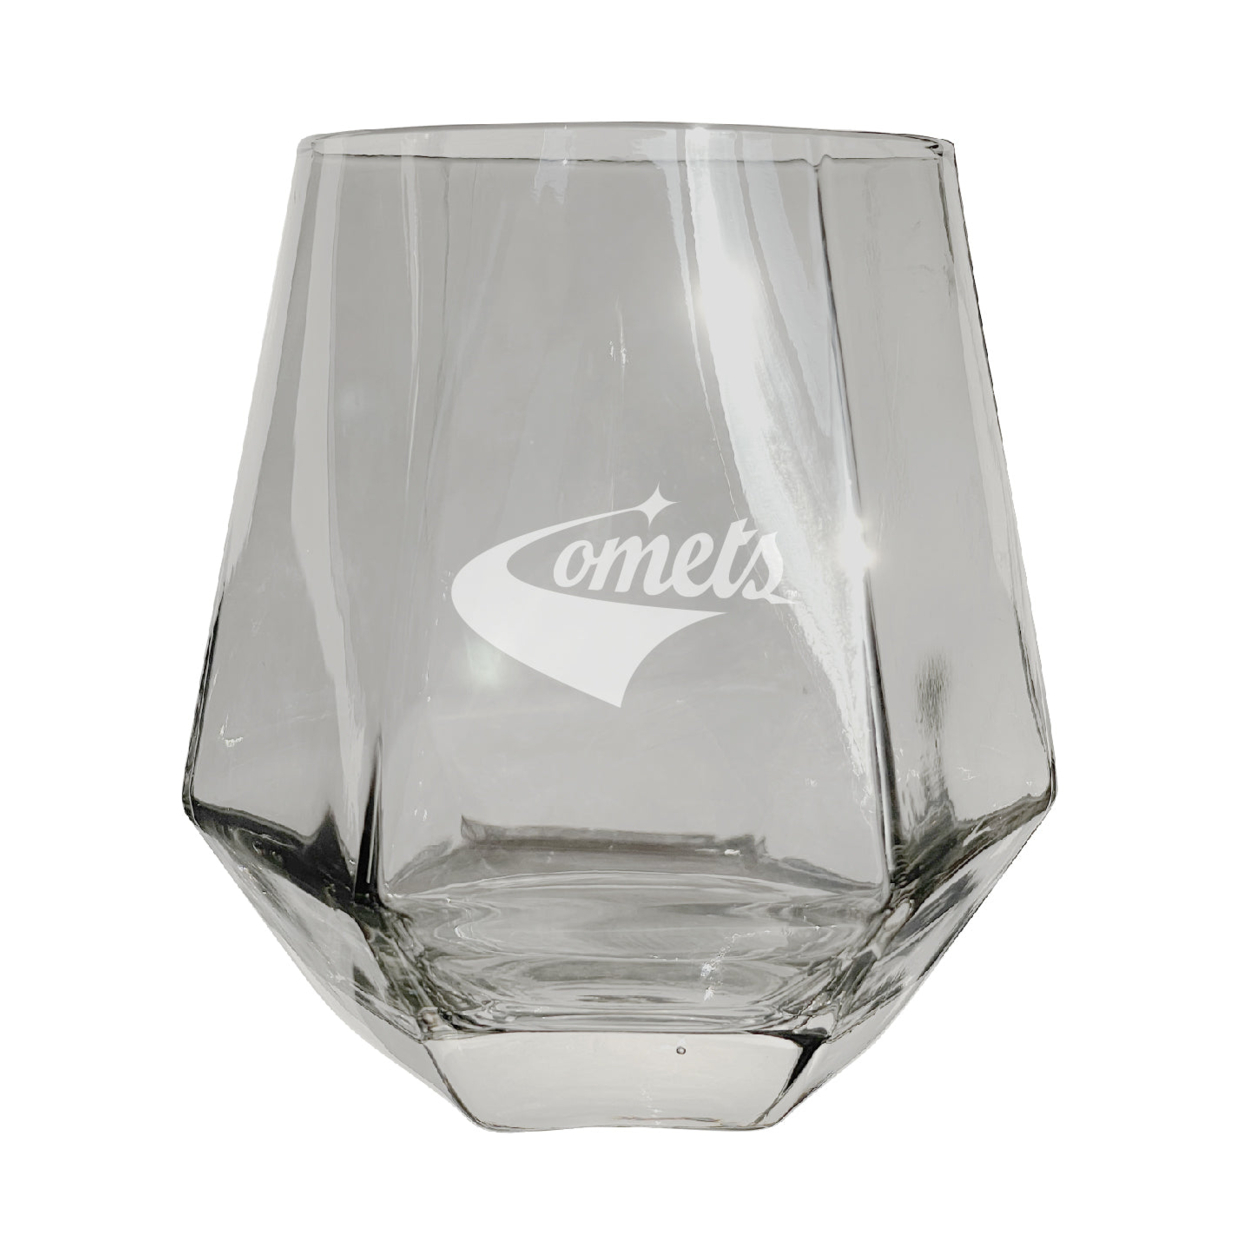 University Of Texas At Dallas Etched Diamond Cut Stemless 10 Ounce Wine Glass Clear